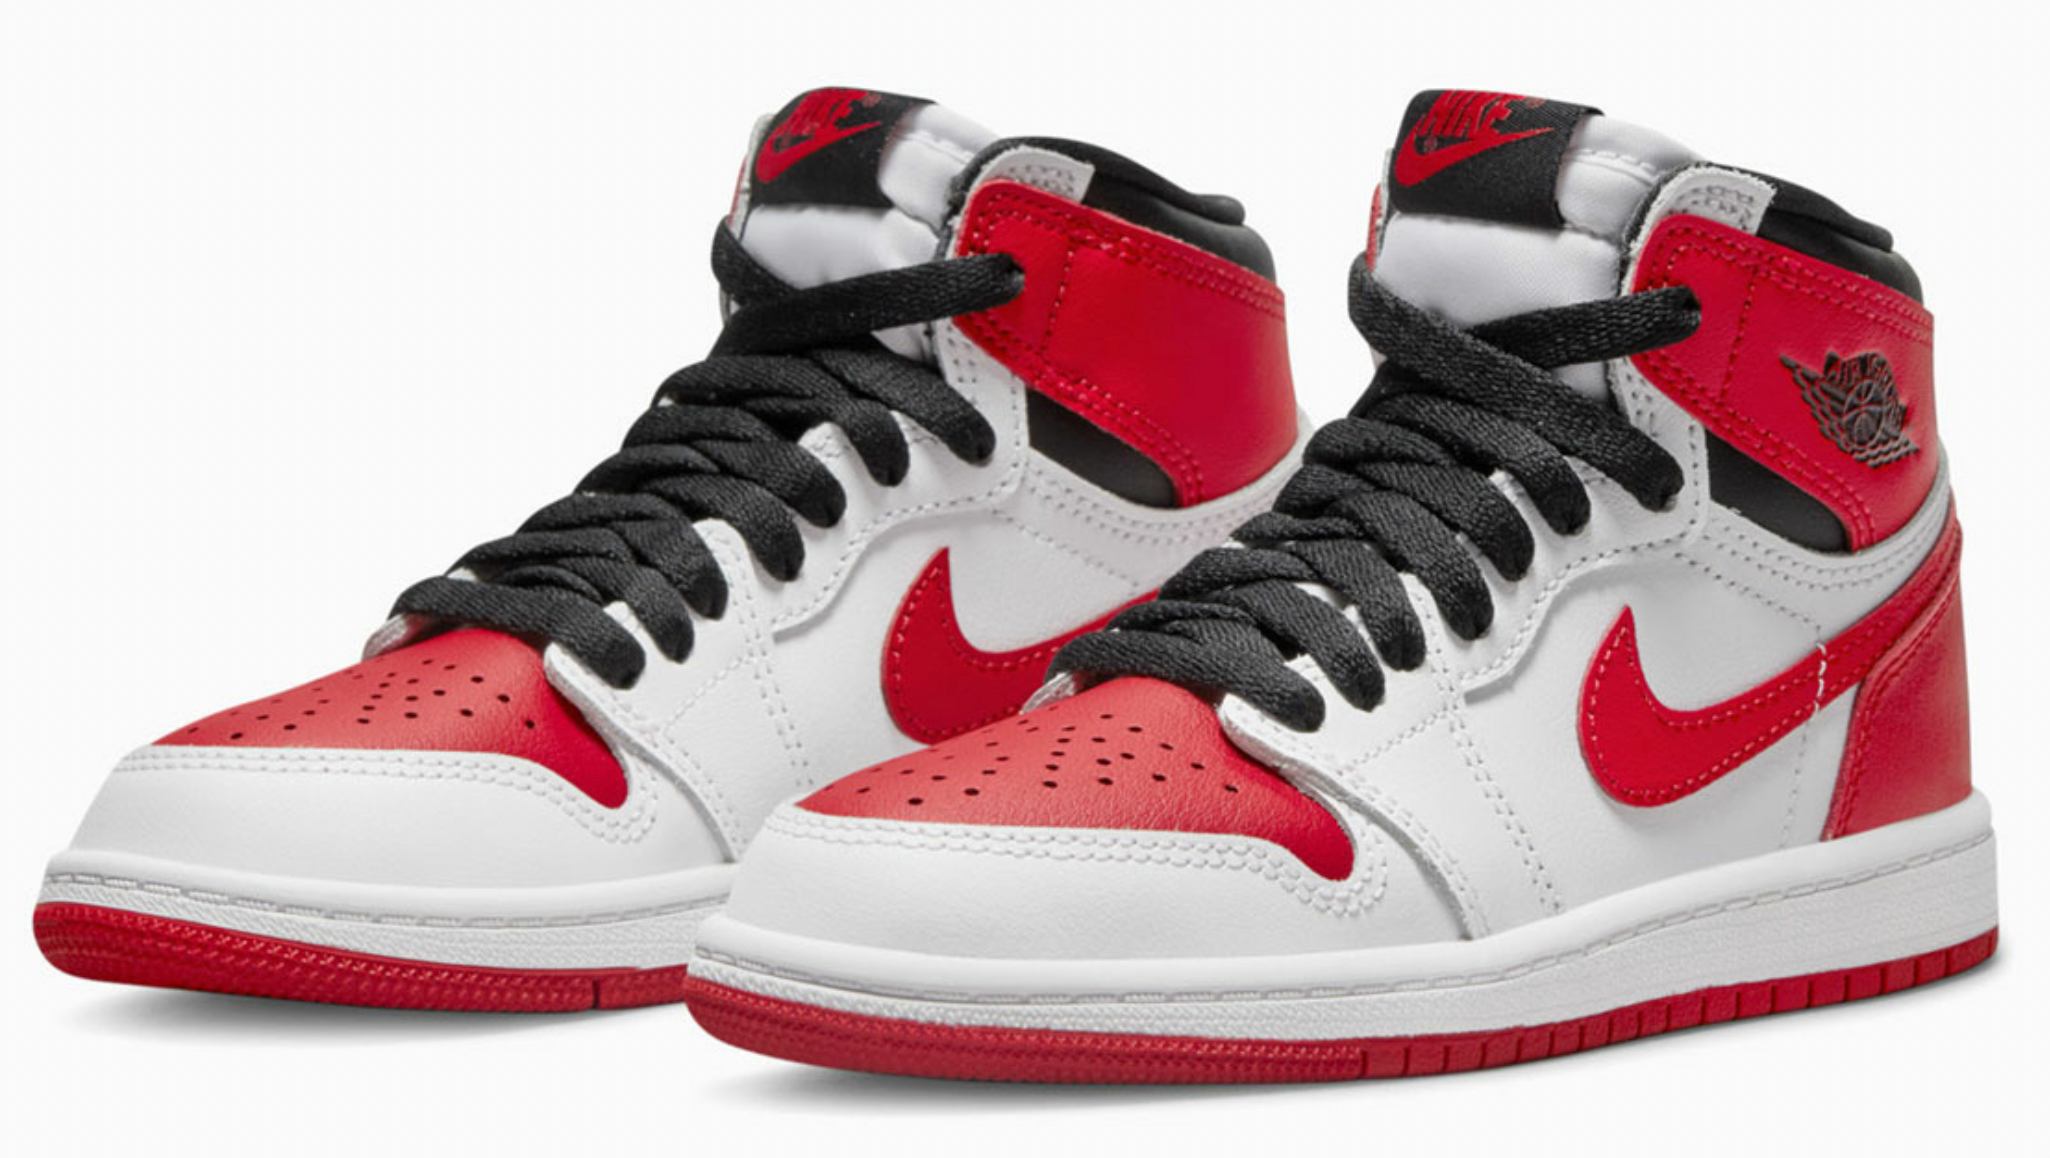 Jordan Red-White Brand will be decorating the